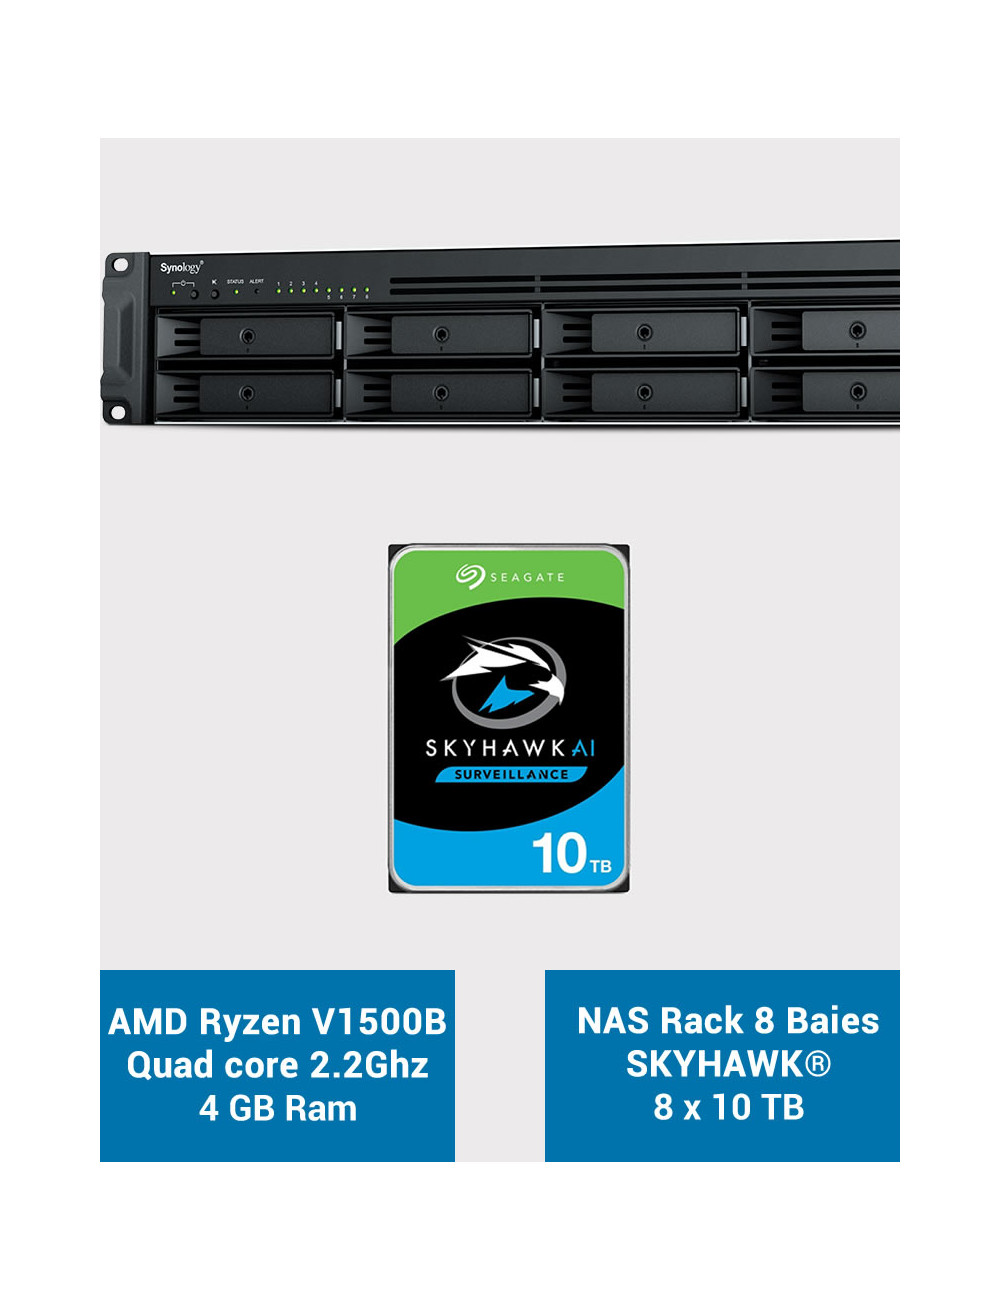 Synology RS1221+ Serveur NAS Rack SKYHAWK 80To (8x10To)